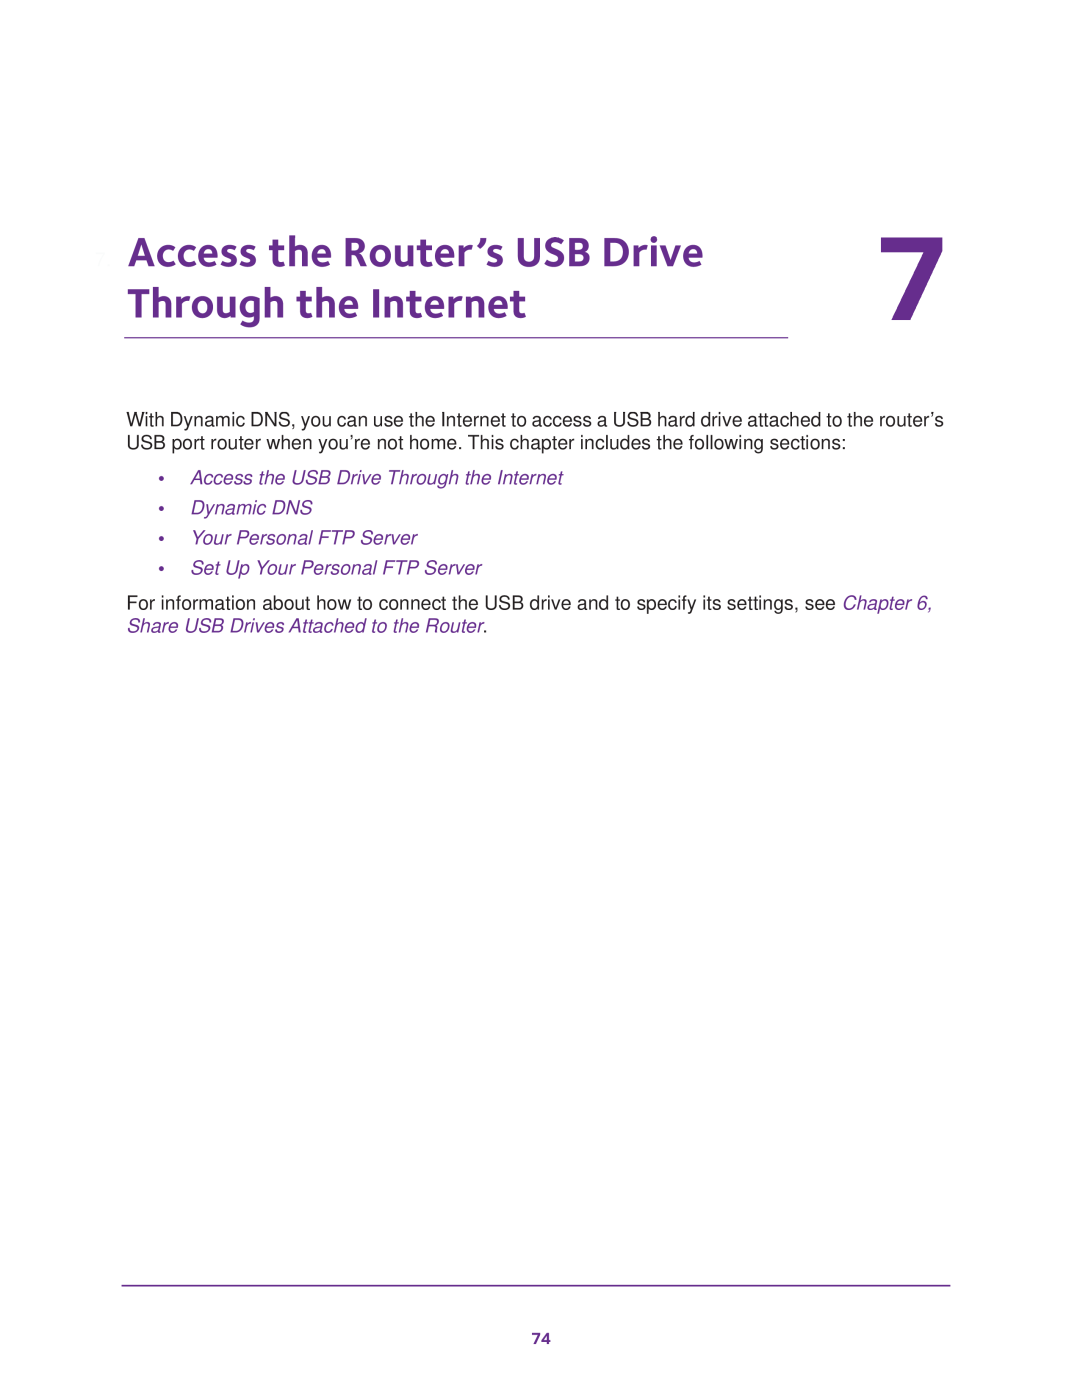 NETGEAR Model R7000 user manual Access the Router’s USB Drive, Through the Internet 